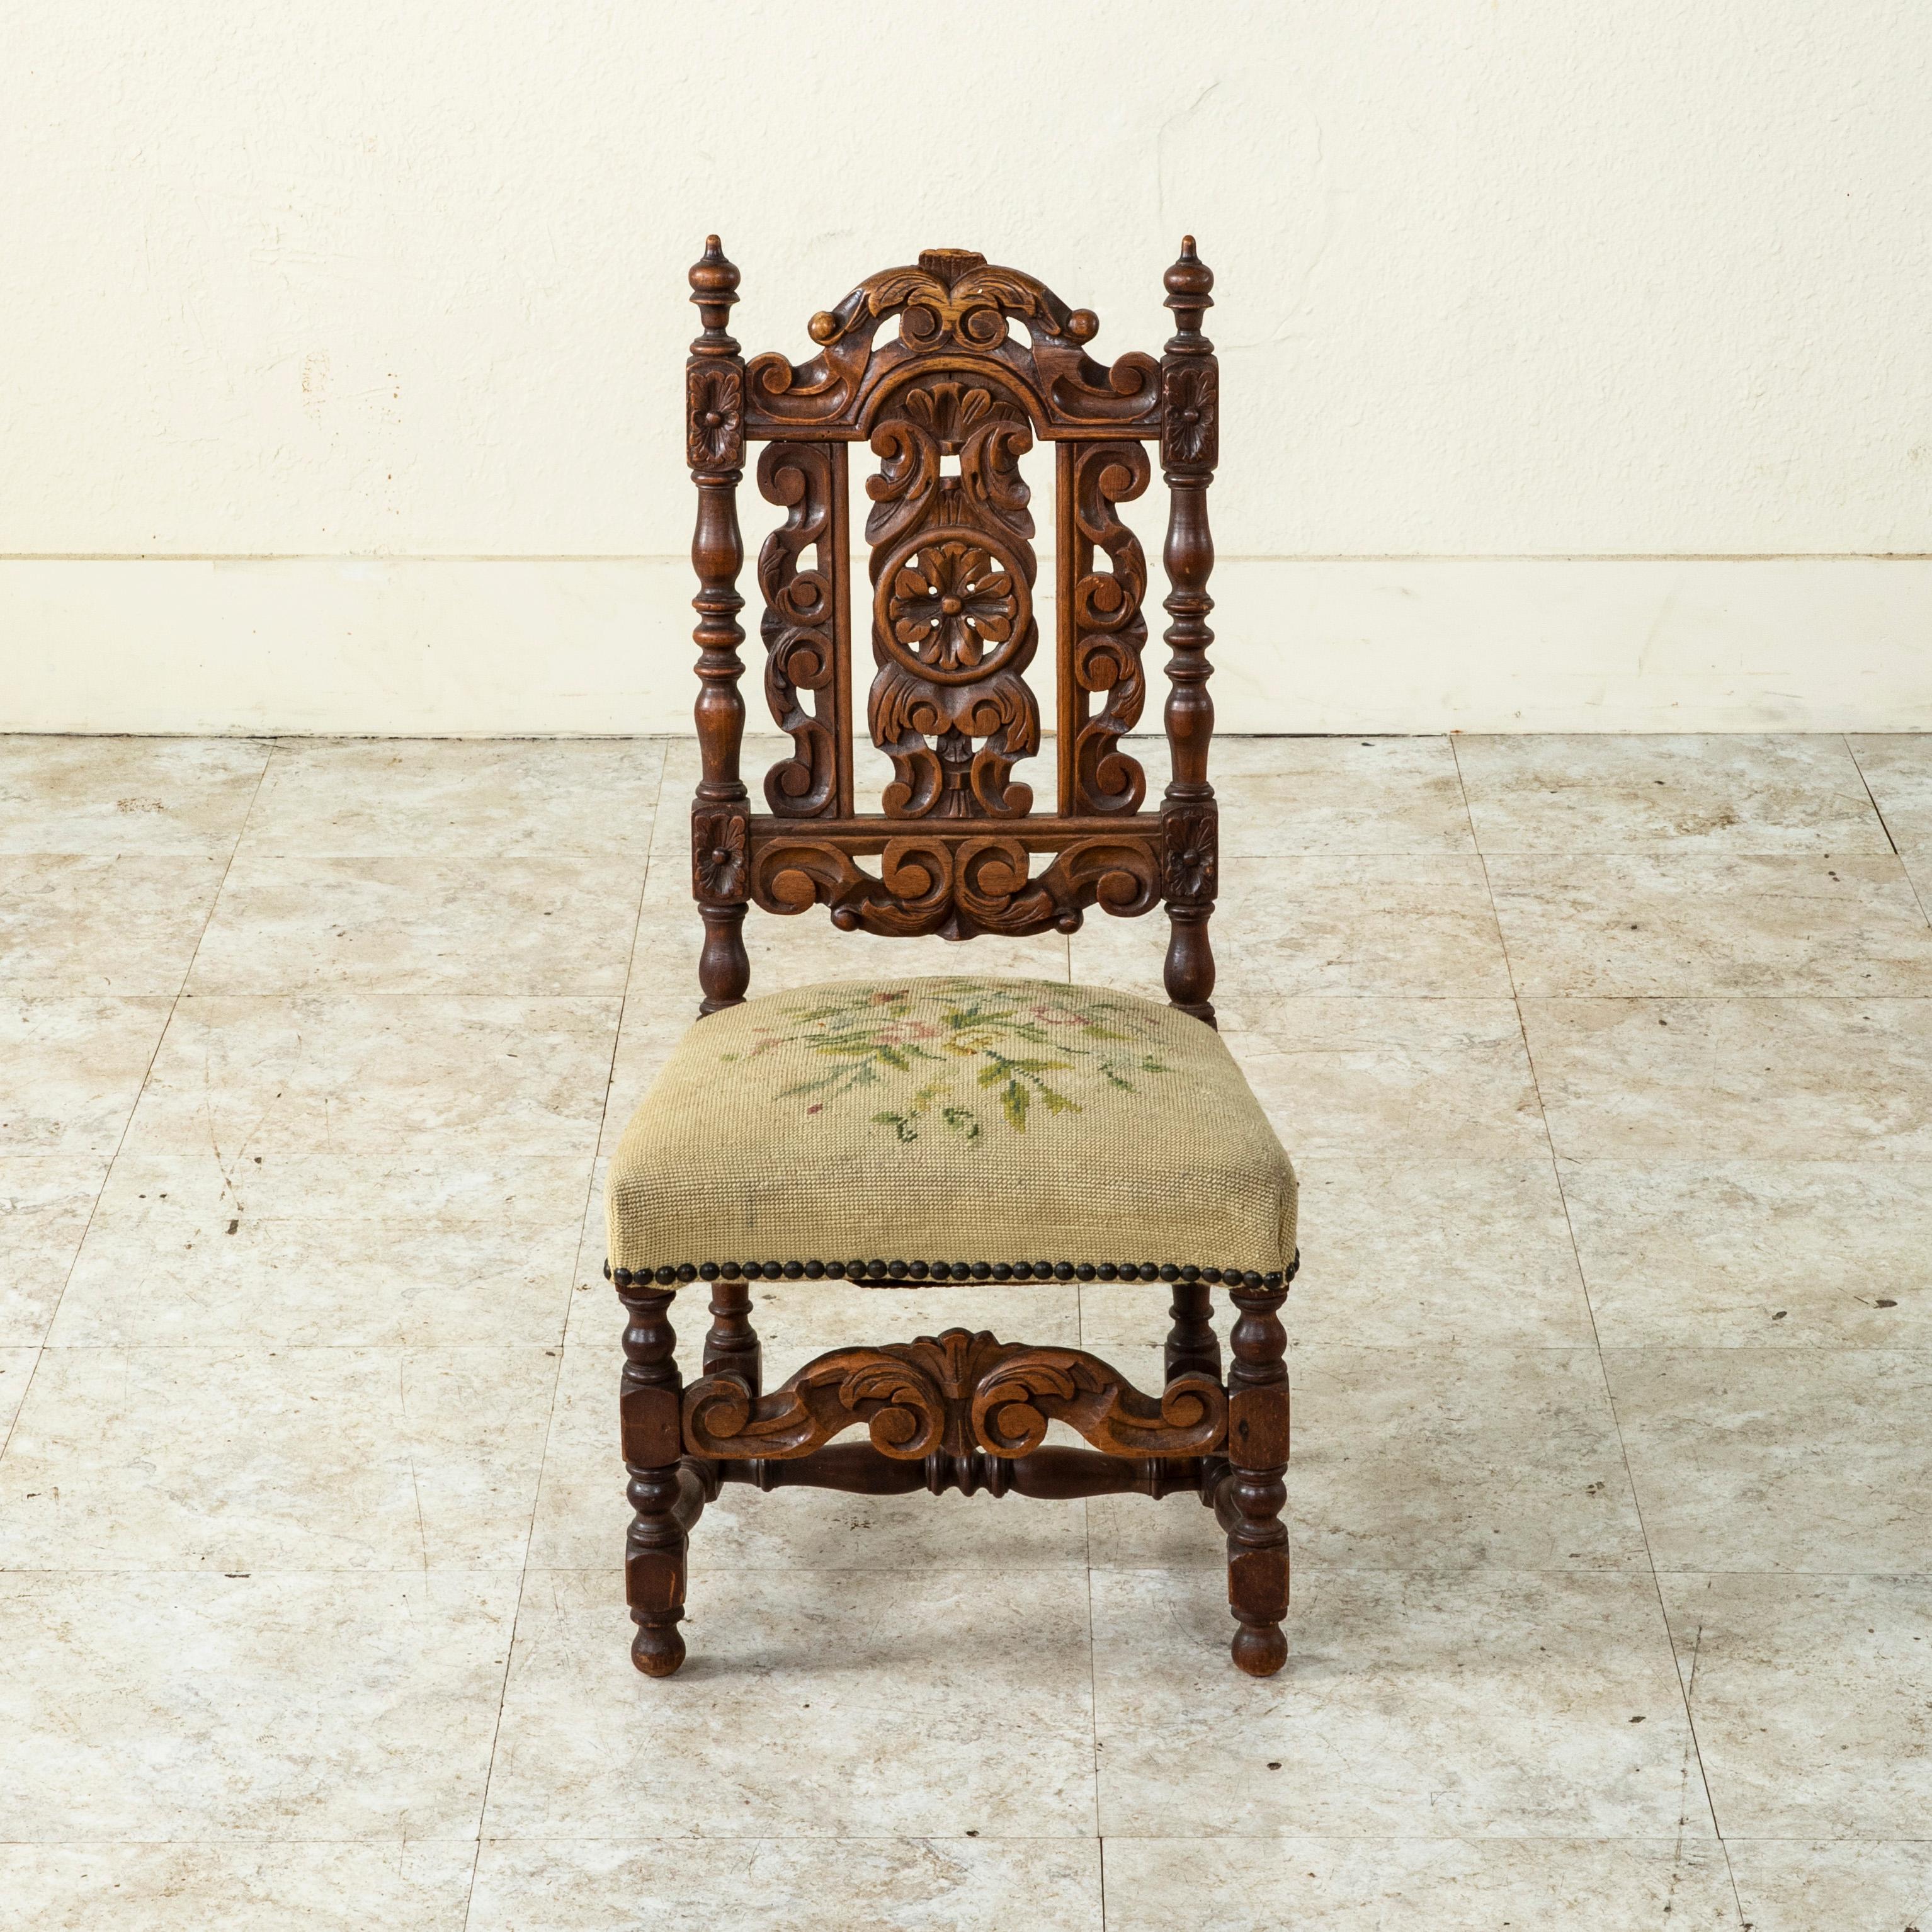 This late 19th century French oak child's chair features a seat back with hand carved rosettes at the corners, scrolling leaves, a central rosette, and finials. The seat rests on turned legs joined by a turned H-stretcher. A hand carved panel joins